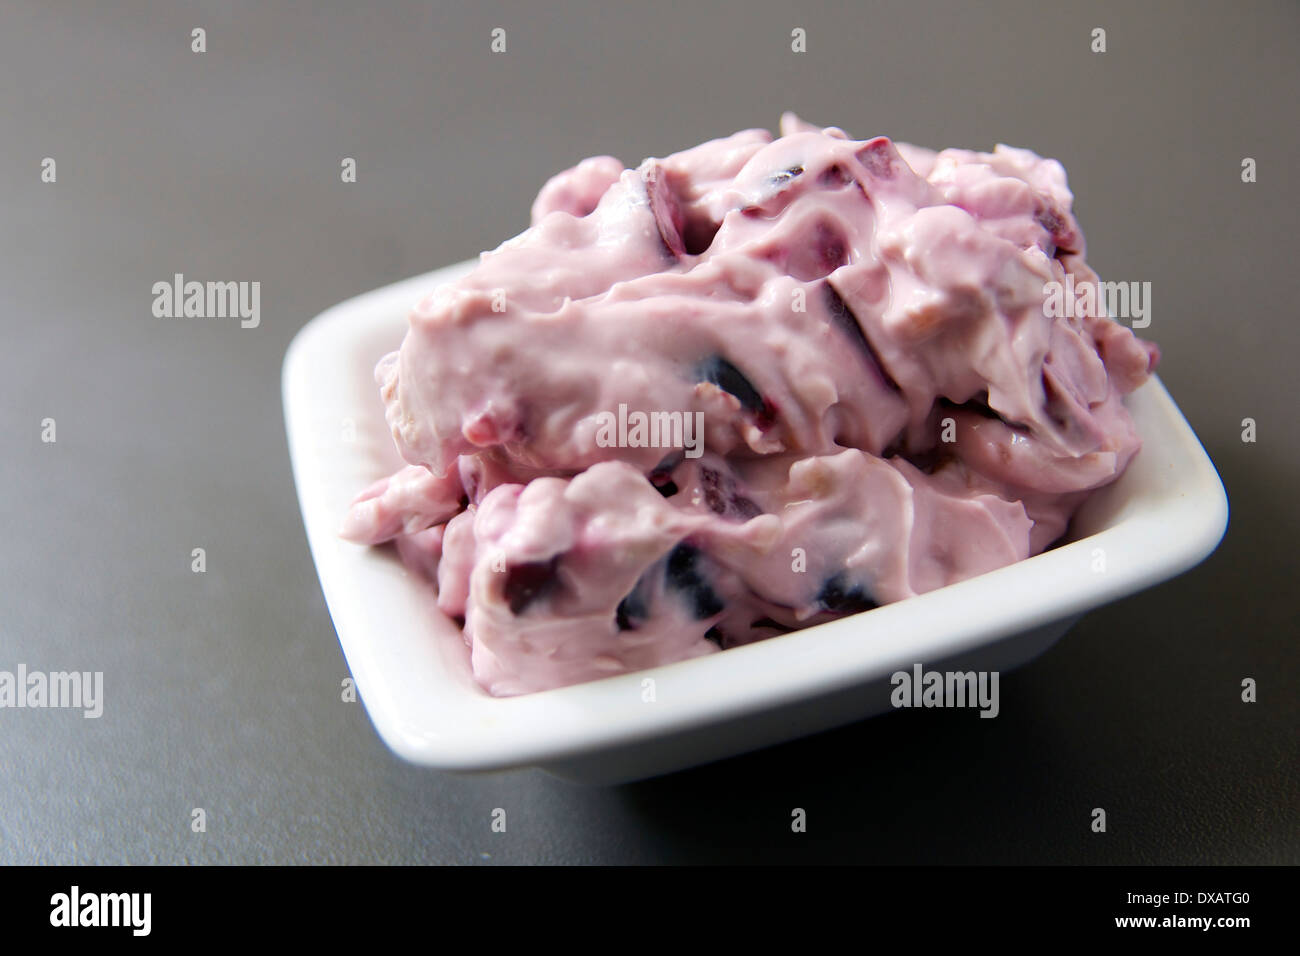 Home made creamy spread with cherries, walnuts and vegan cream cheese. Stock Photo